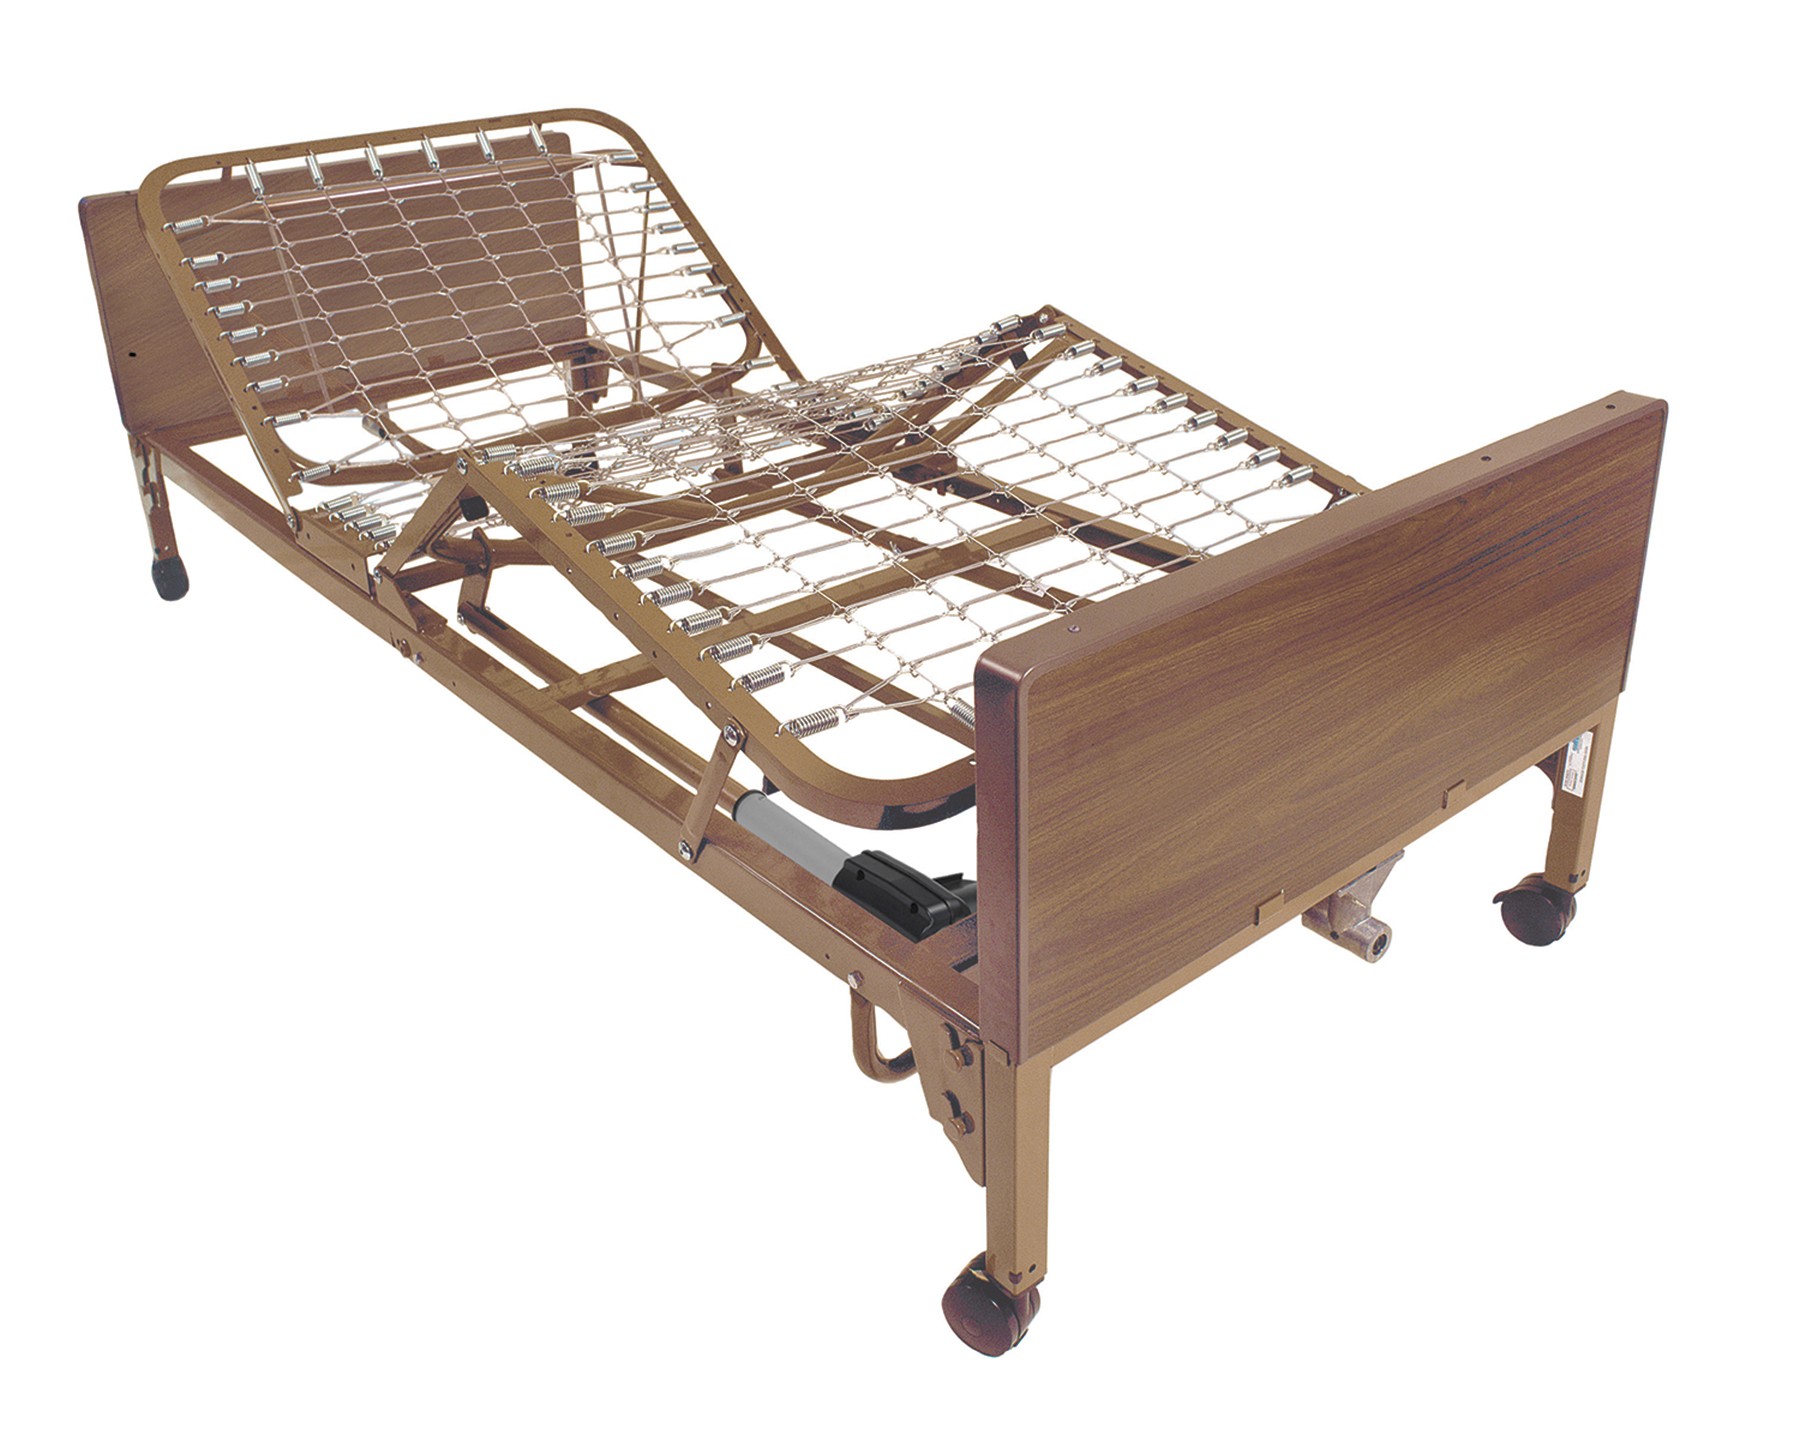 Pomona inexpensive Electric Hospital Beds cheap discount sale price